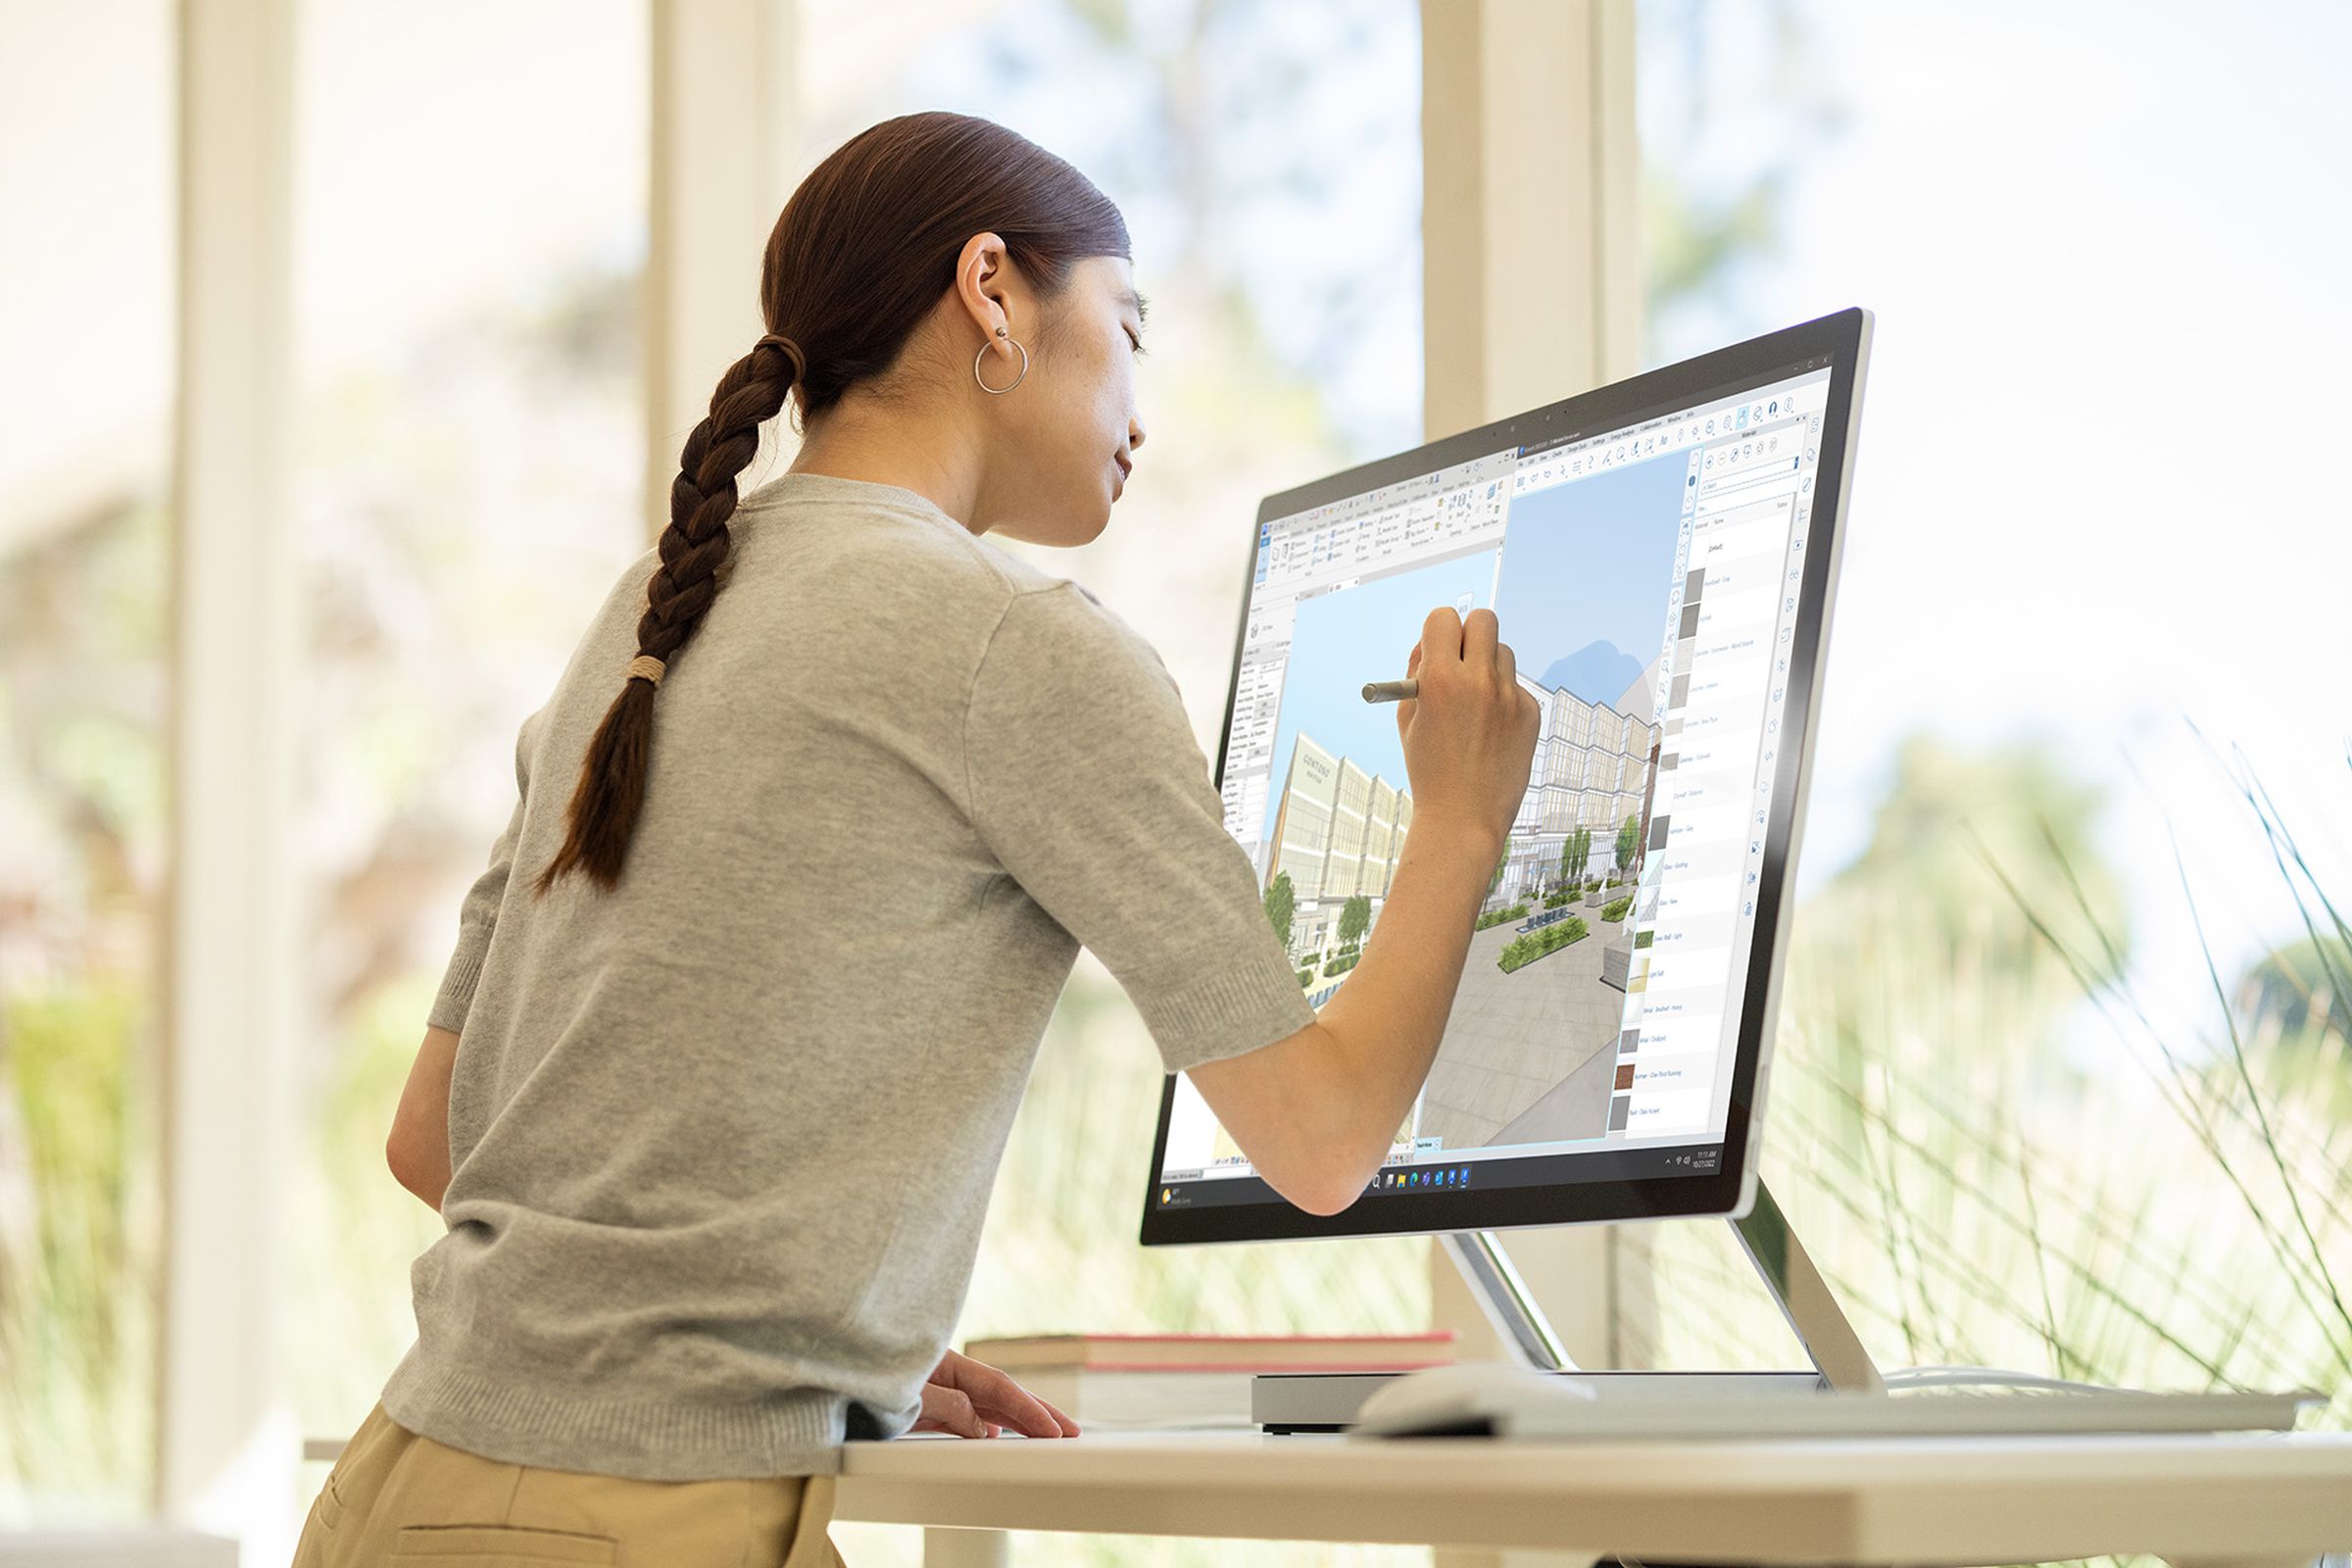 A user draws with a stylus on the Surface Studio 2 Plus at a standig desk.